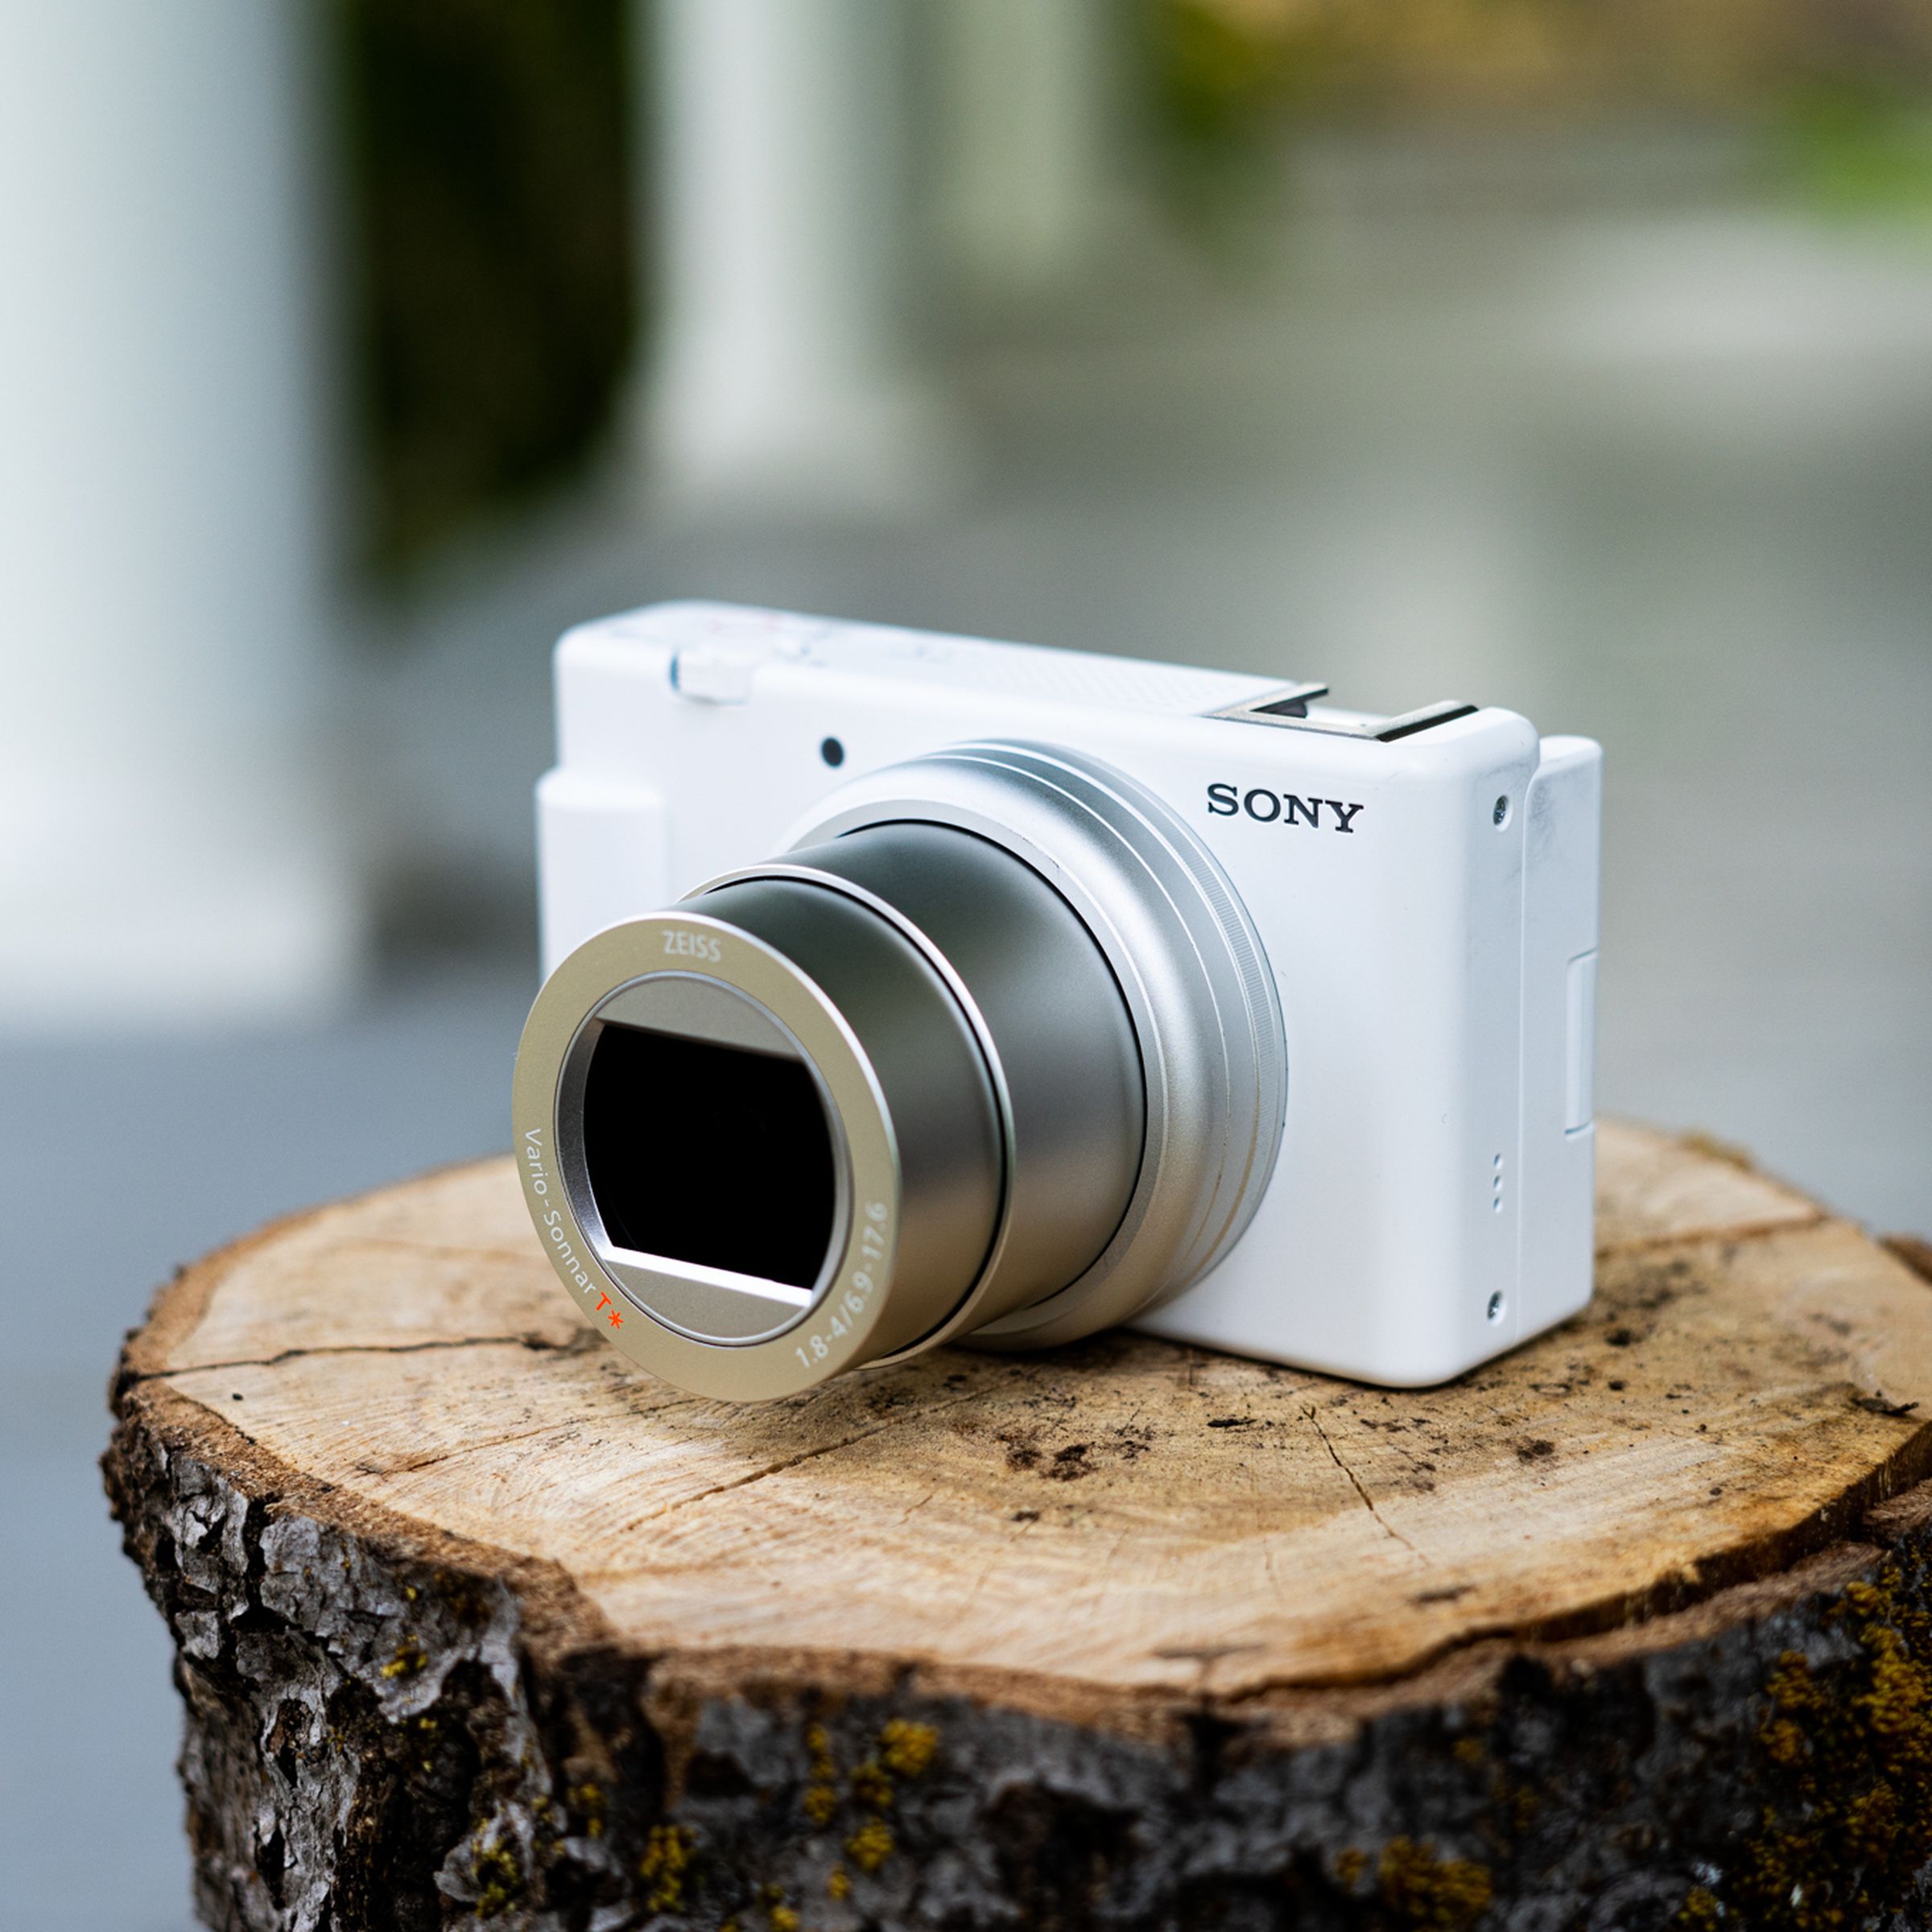 The Sony ZV-1 II camera, in white and silver, sitting on a cut log with its lens extended.